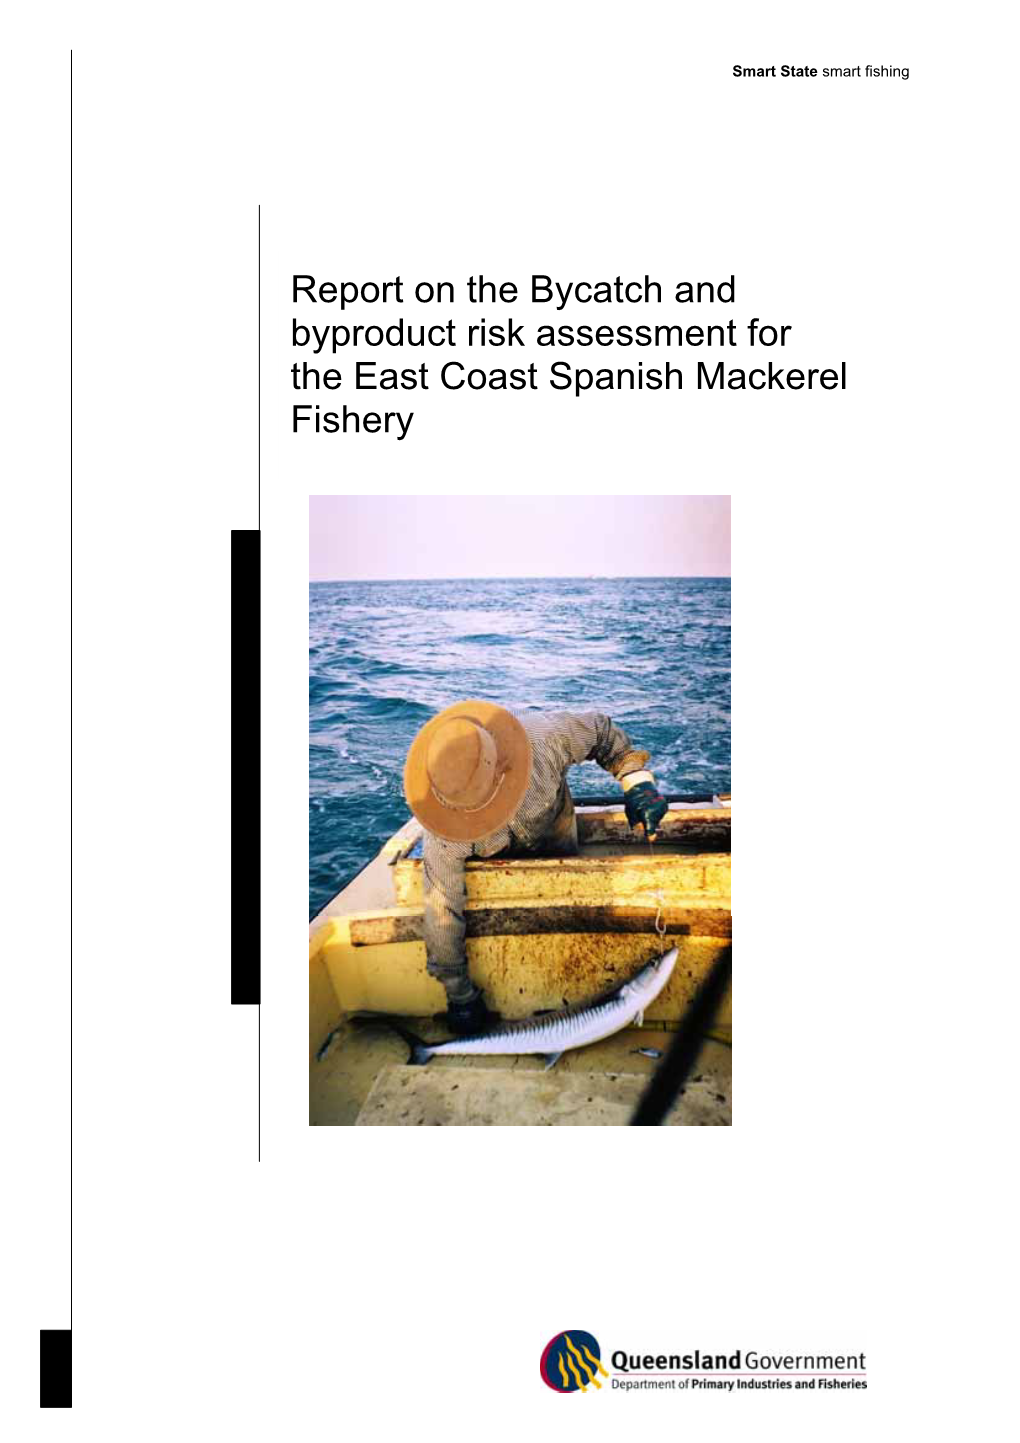 Report on the Bycatch and Byproduct Risk Assessments for the East Coast